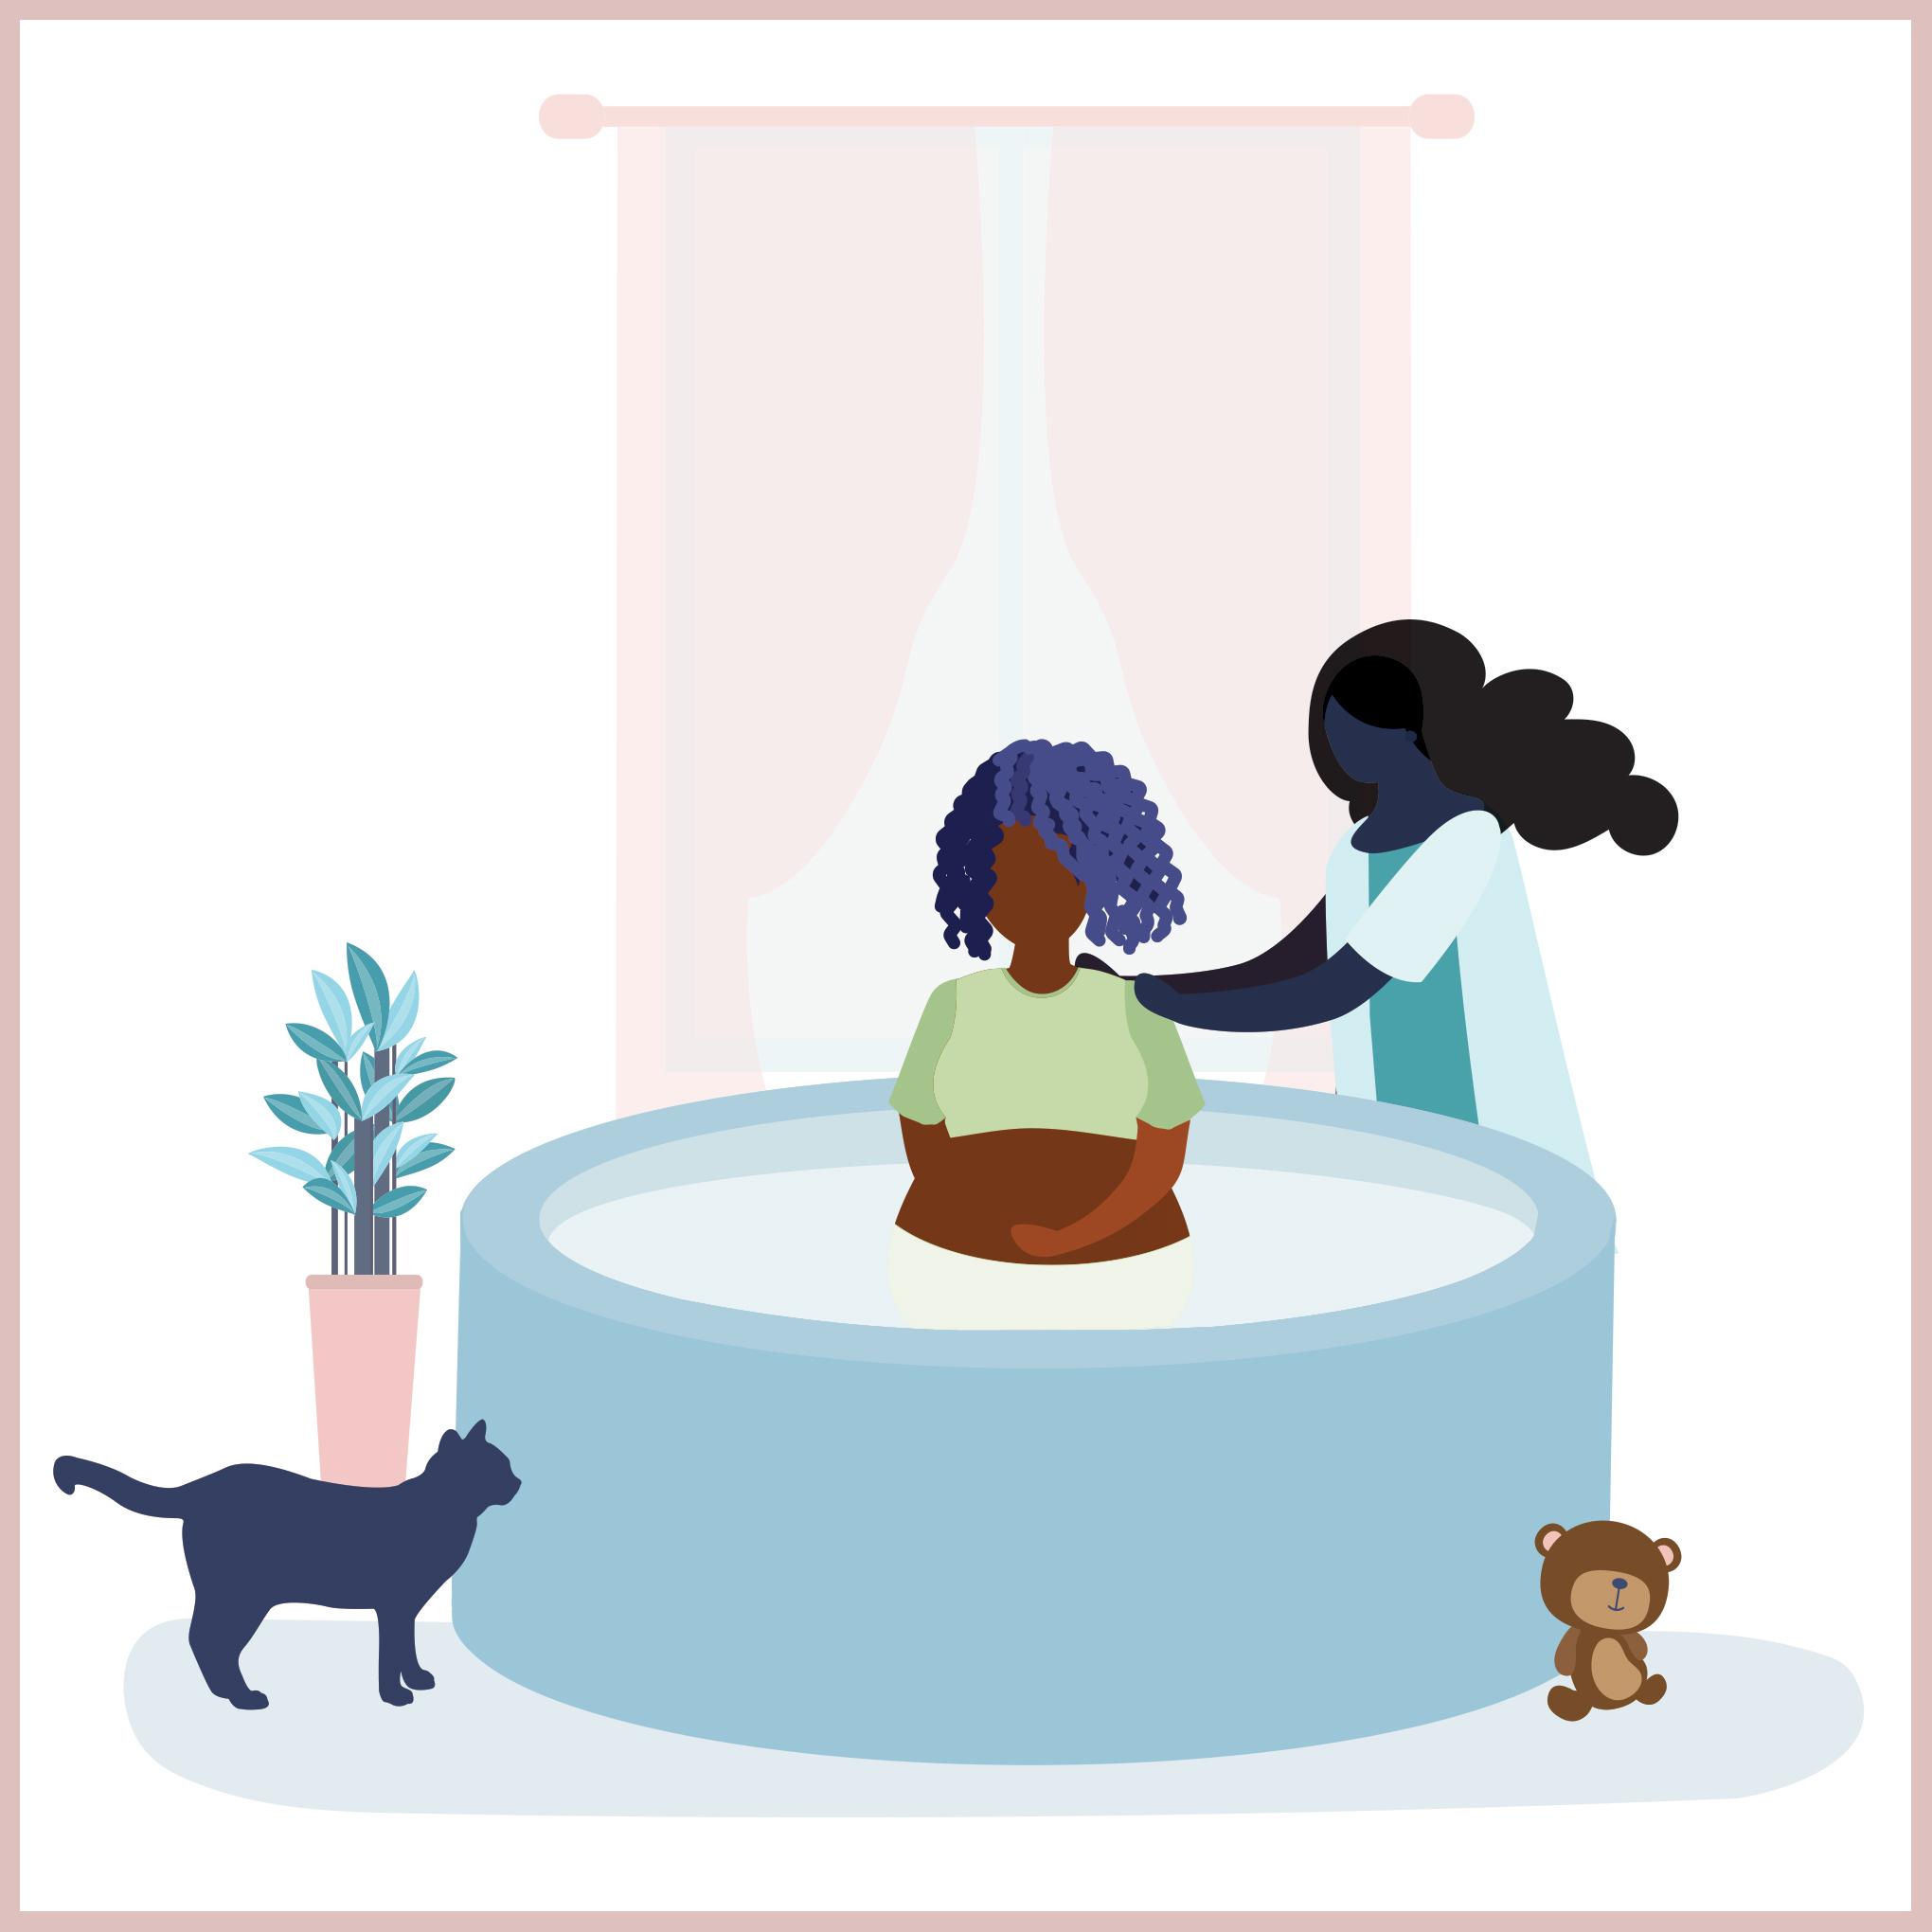 Illustration of a Black woman in labor, sitting in a tub, assisted by a midwife. In the foreground is a cat and a teddy bear, a houseplant is in the background.